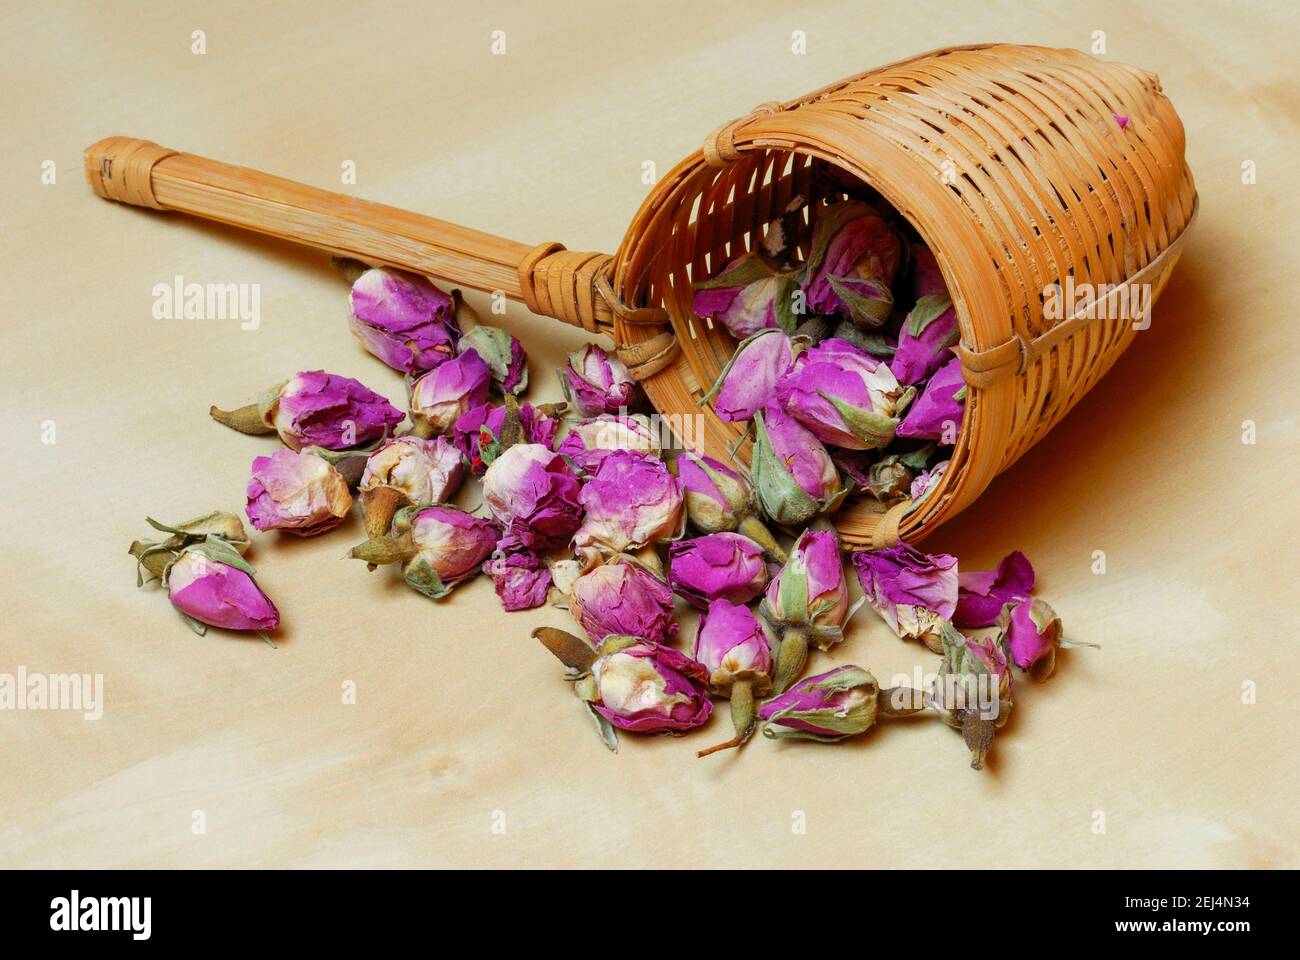 Dried rosebuds in bamboo tea strainer Stock Photo